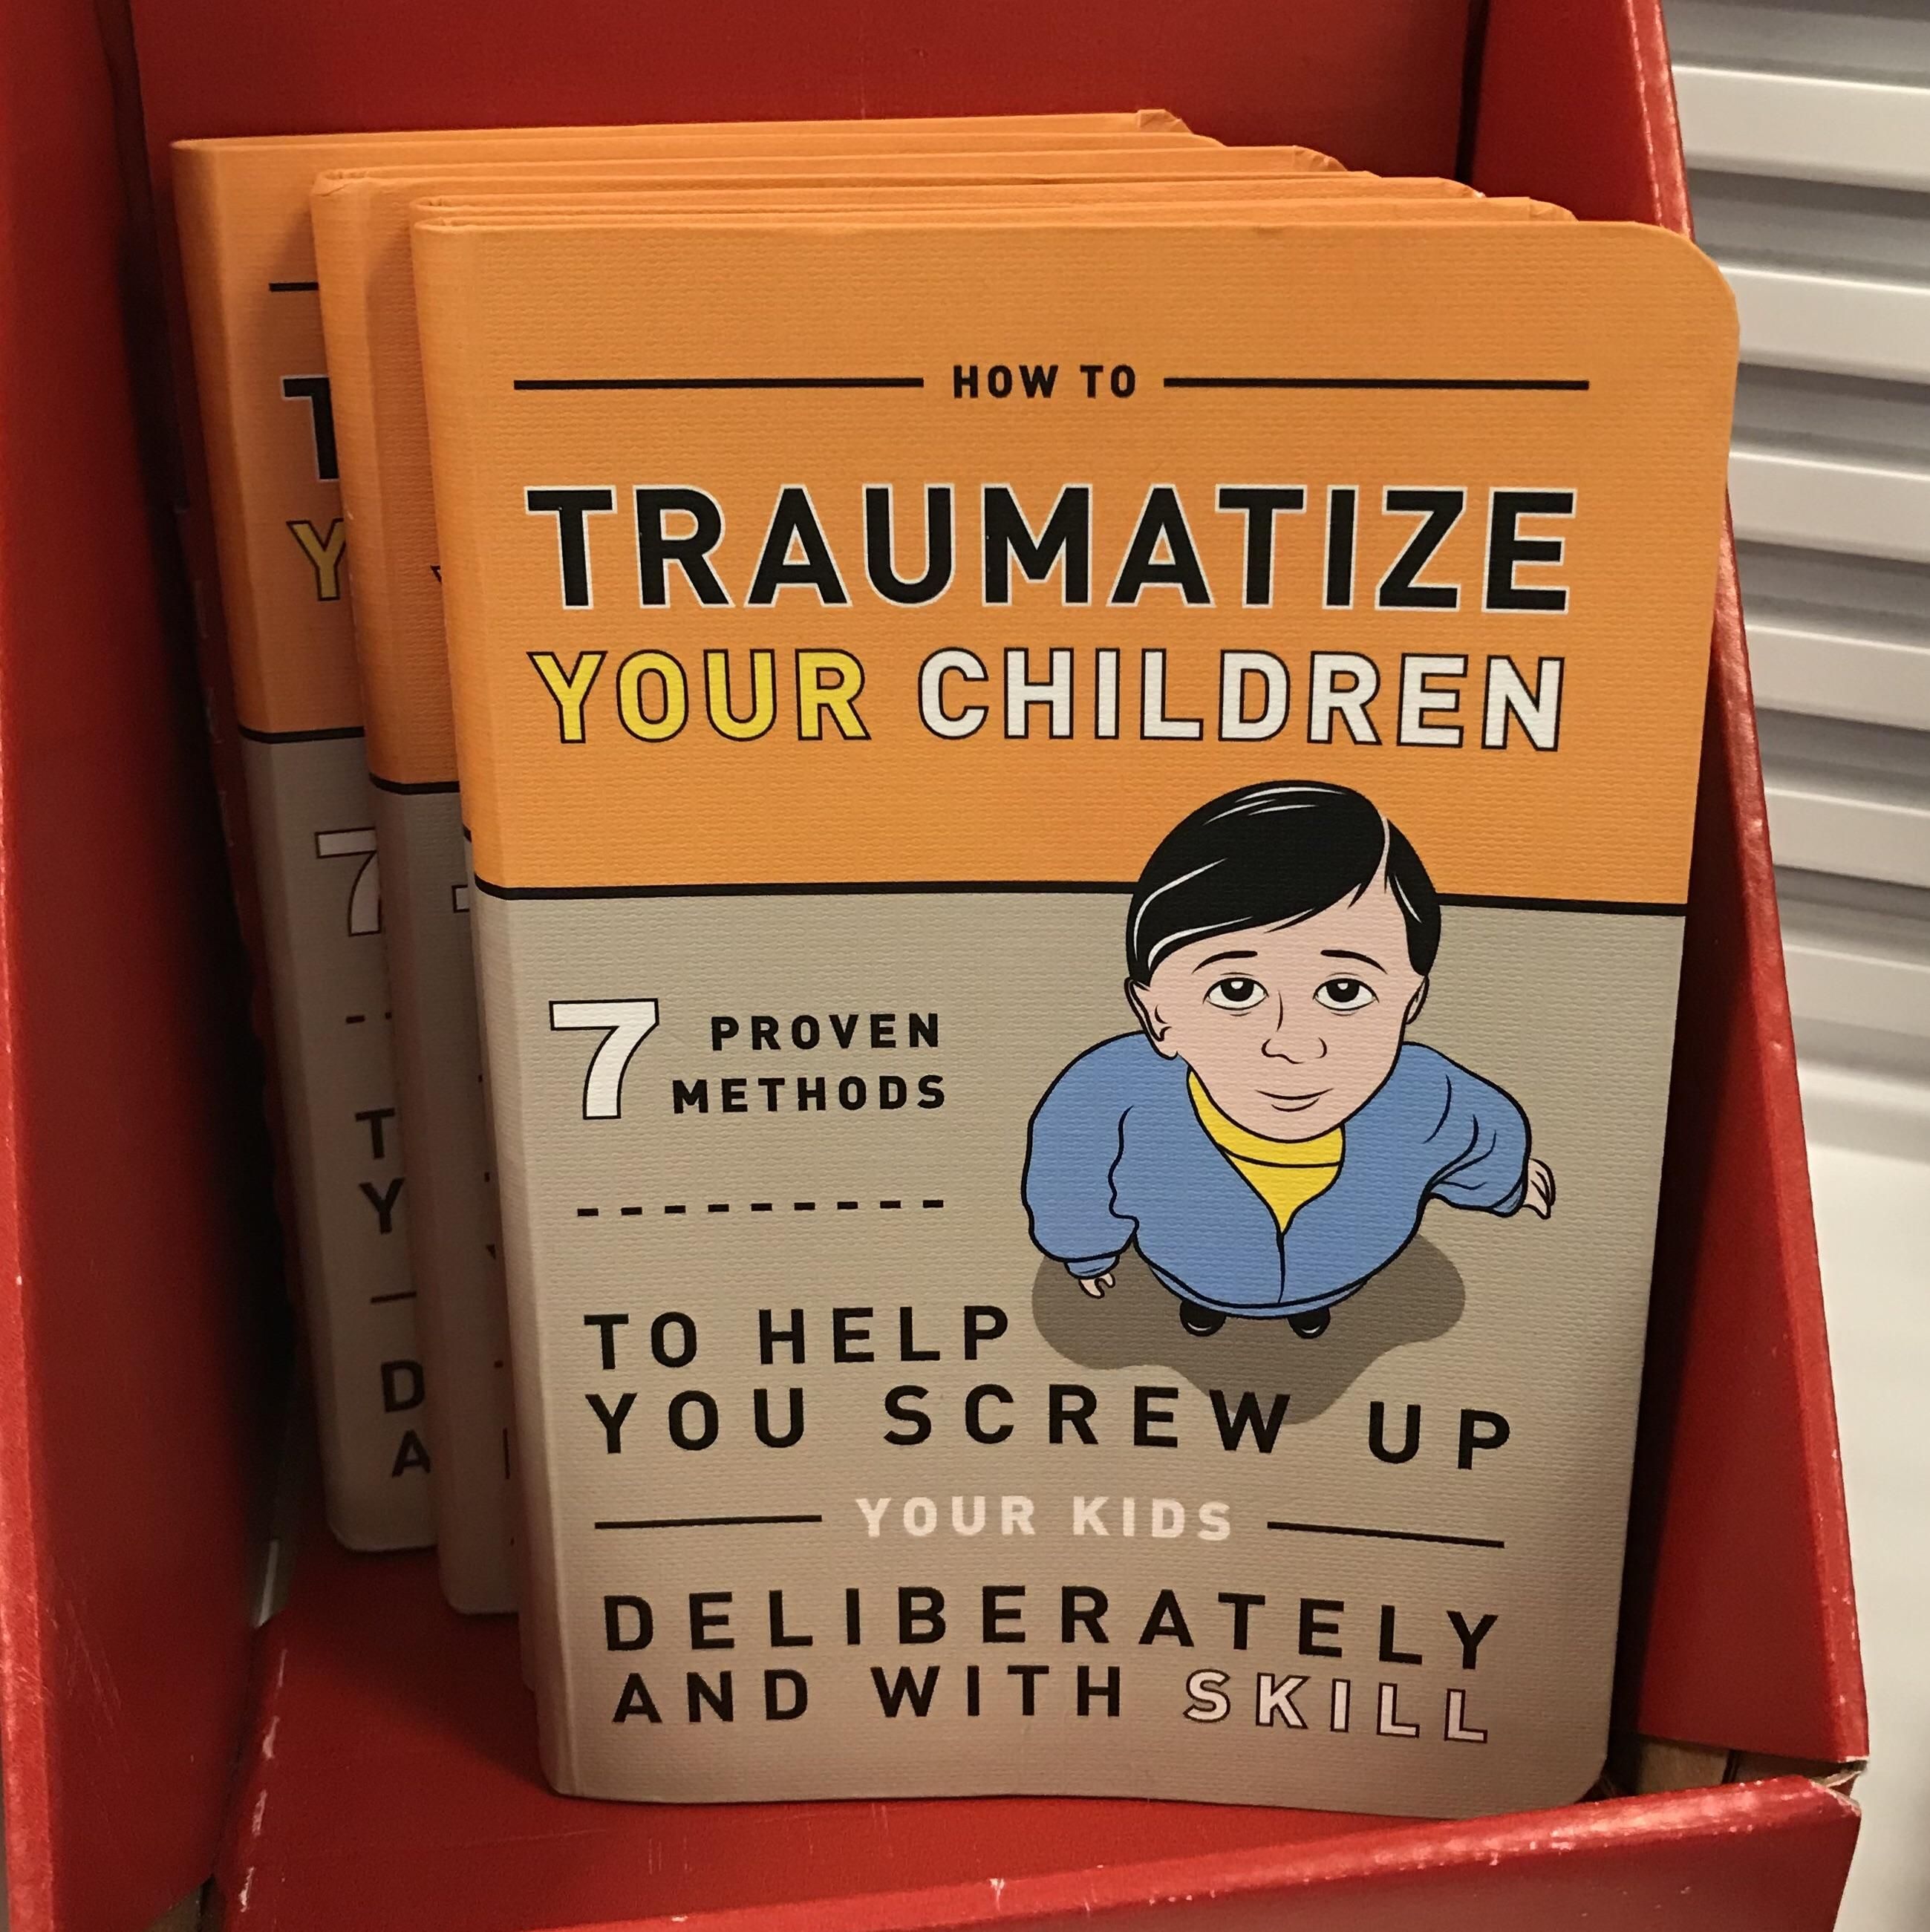 This book I just came across while shopping.